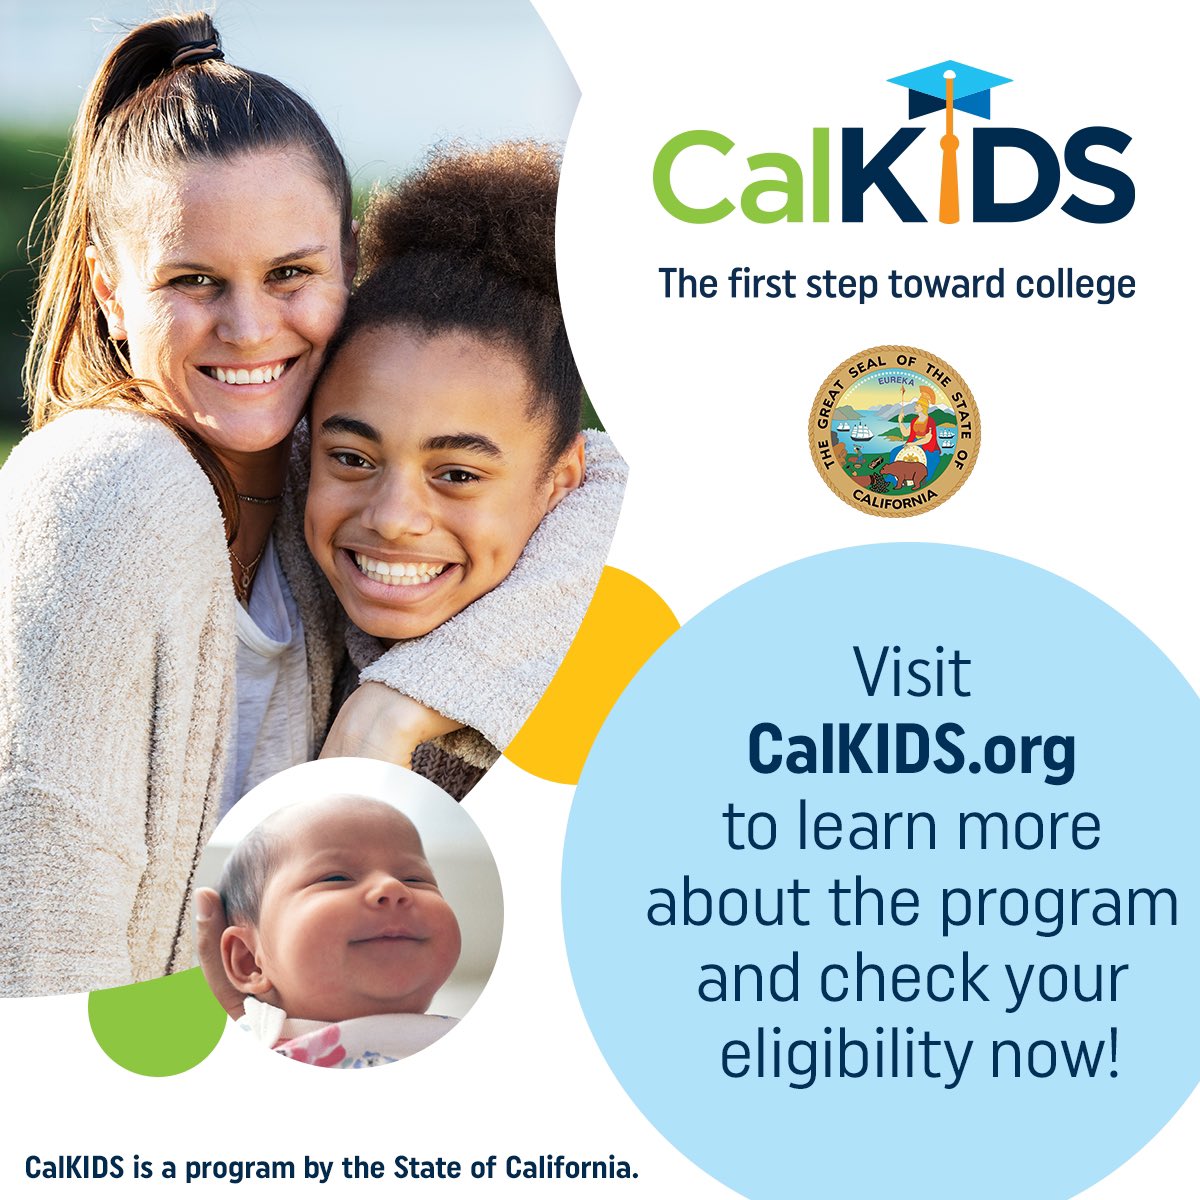 State Supt. @TonyThurmond partnered with @CalTreasurer to promote @CalkidsProgram, a college savings account for CA kids. Research shows children with higher education savings accounts are more likely to go to college and graduate than children without.